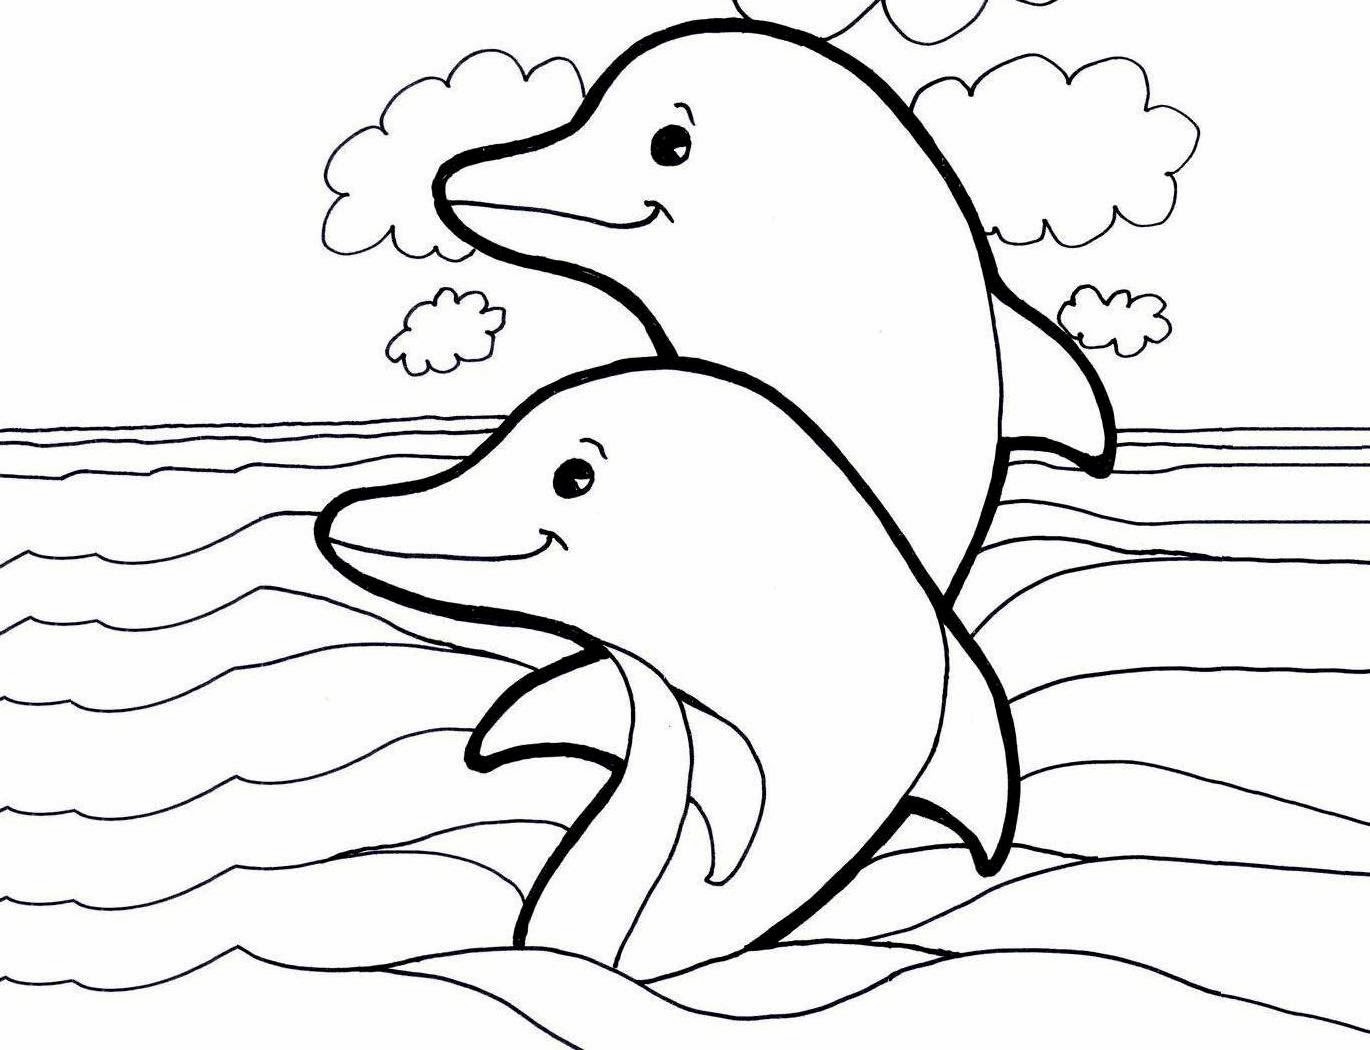 Coloring pages dolphin - Coloring Pages & Pictures - IMAGIXS